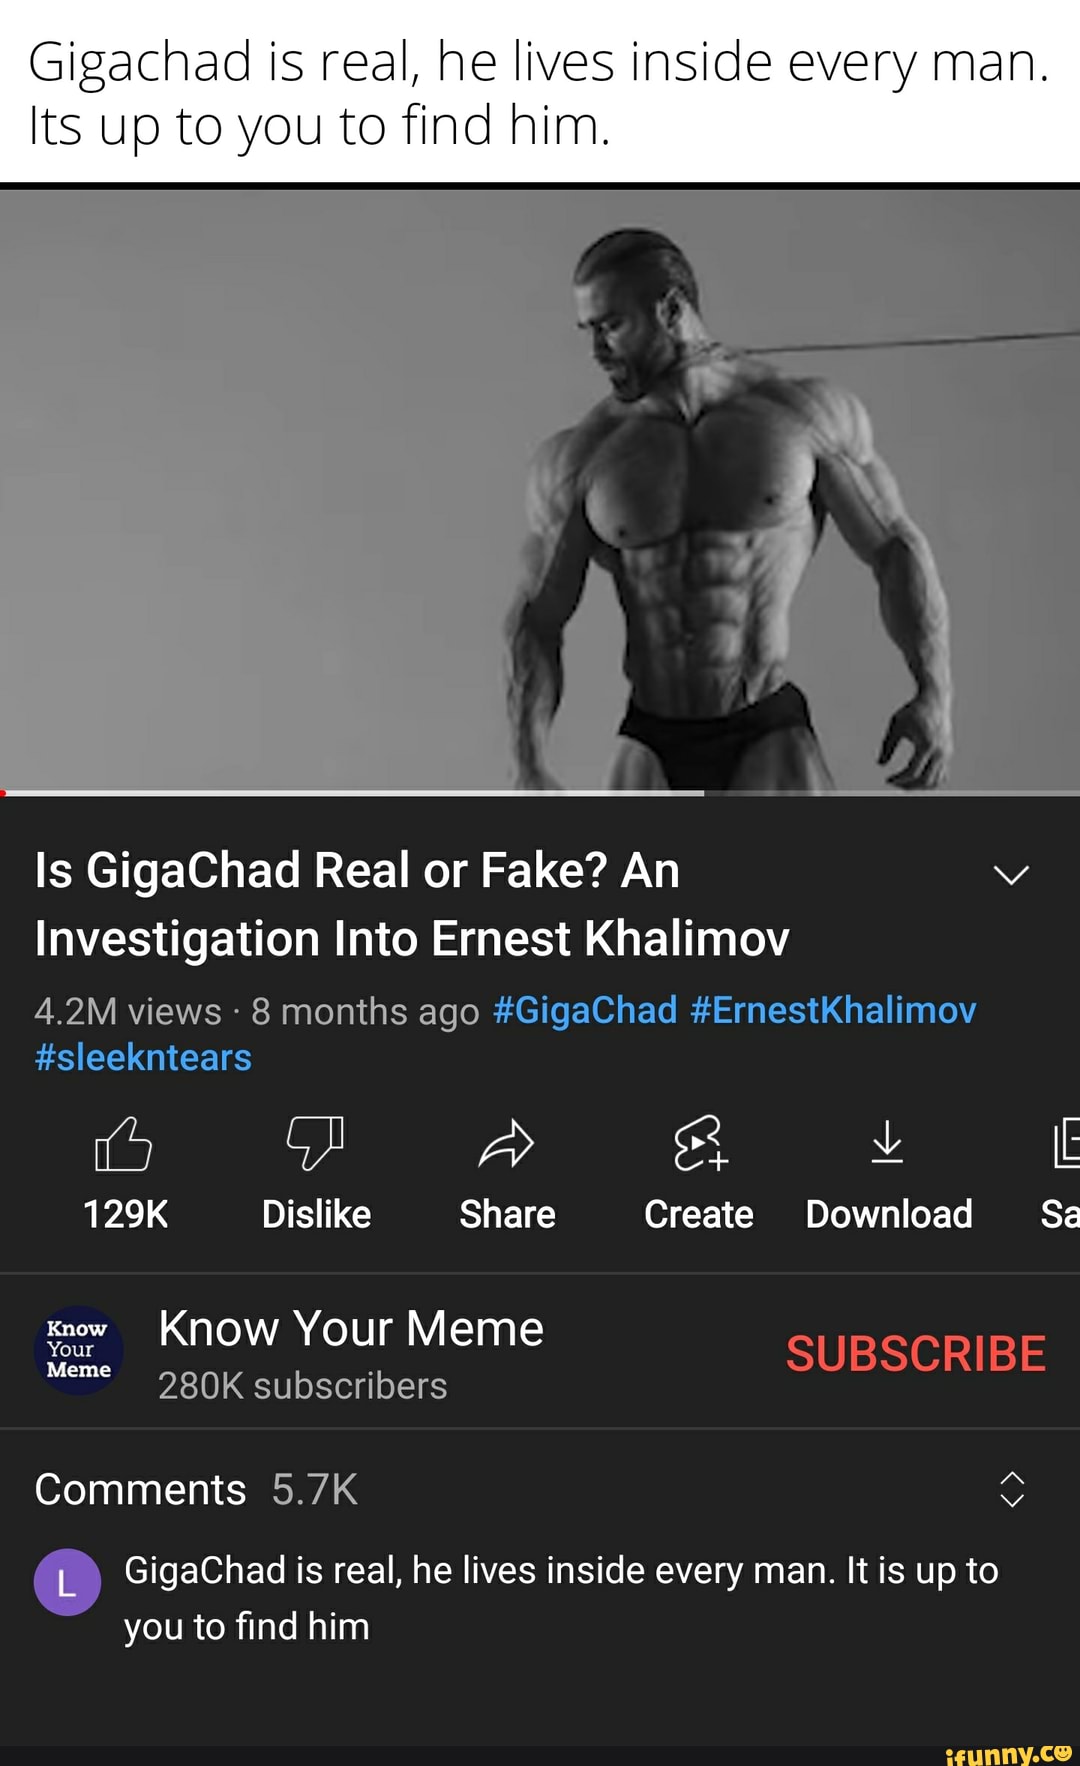 Is Gigachad Real Person? What Do You Think About Him?